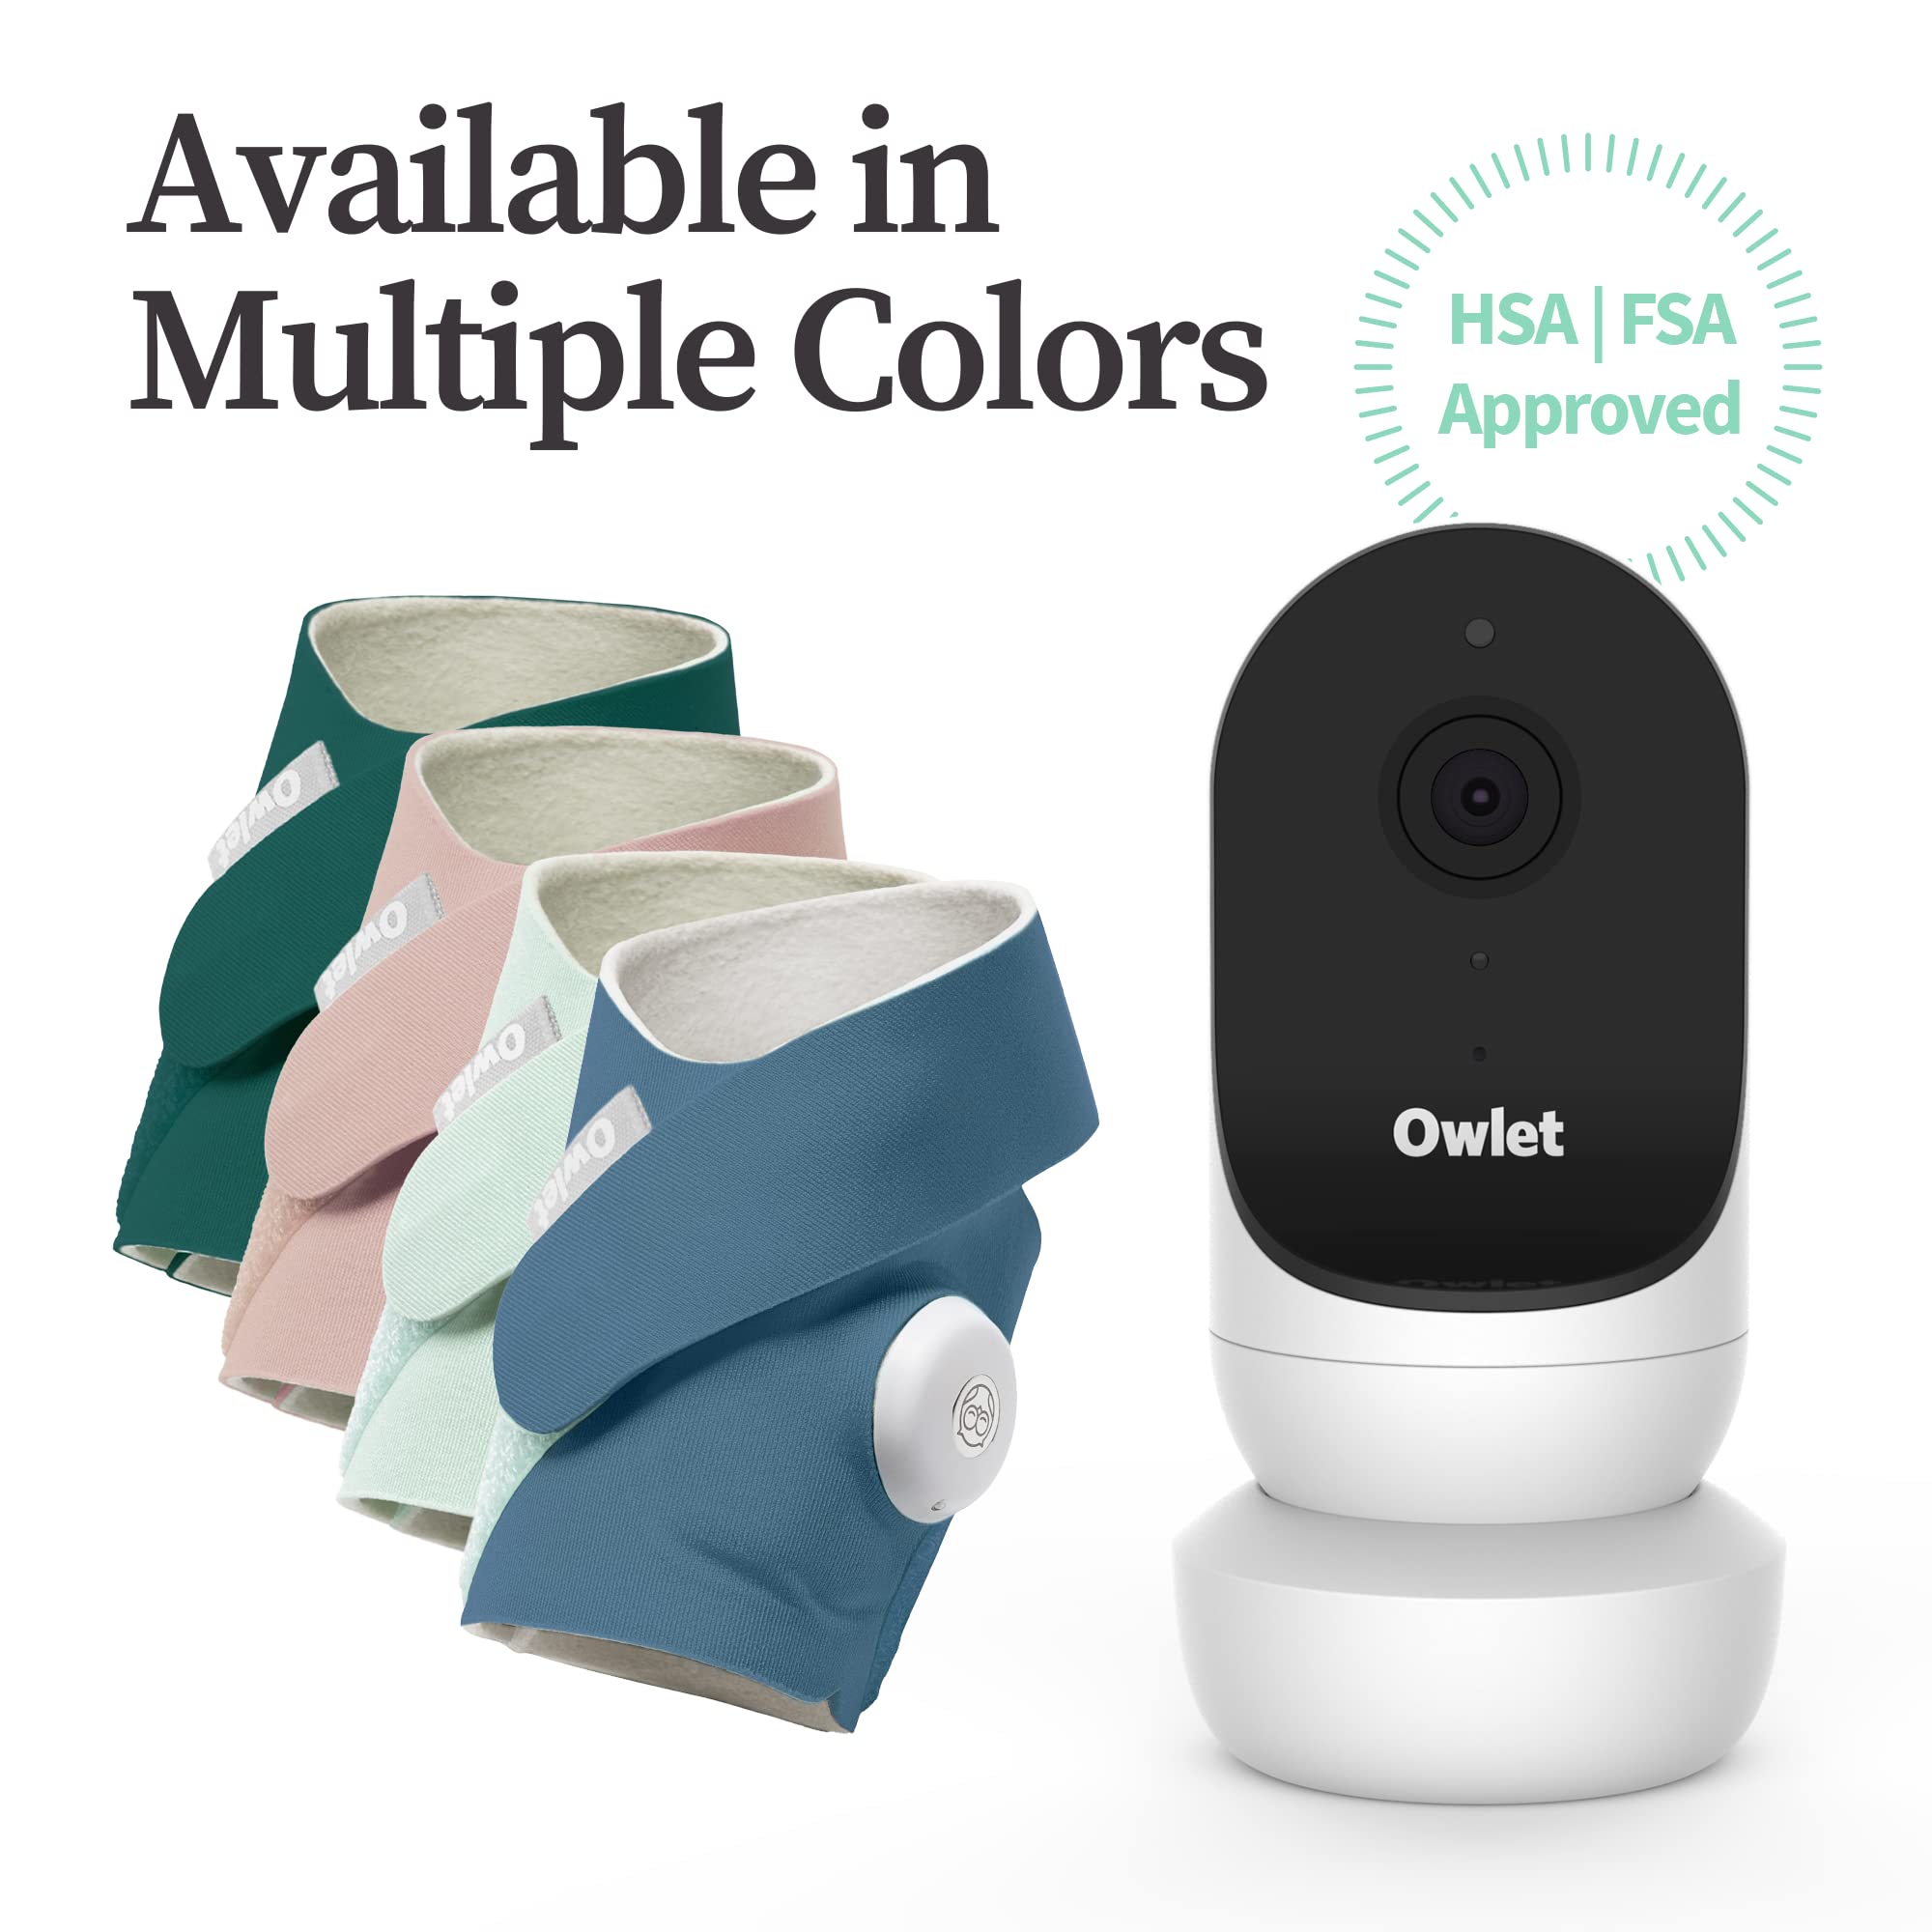 Owlet Dream Duo 2 Smart Baby Monitor - 1080p HD Video Baby Monitor with Dream Sock - Baby Foot Monitor and Sensor Tracks Heartbeat and Oxygen Levels in Infants and Newborns